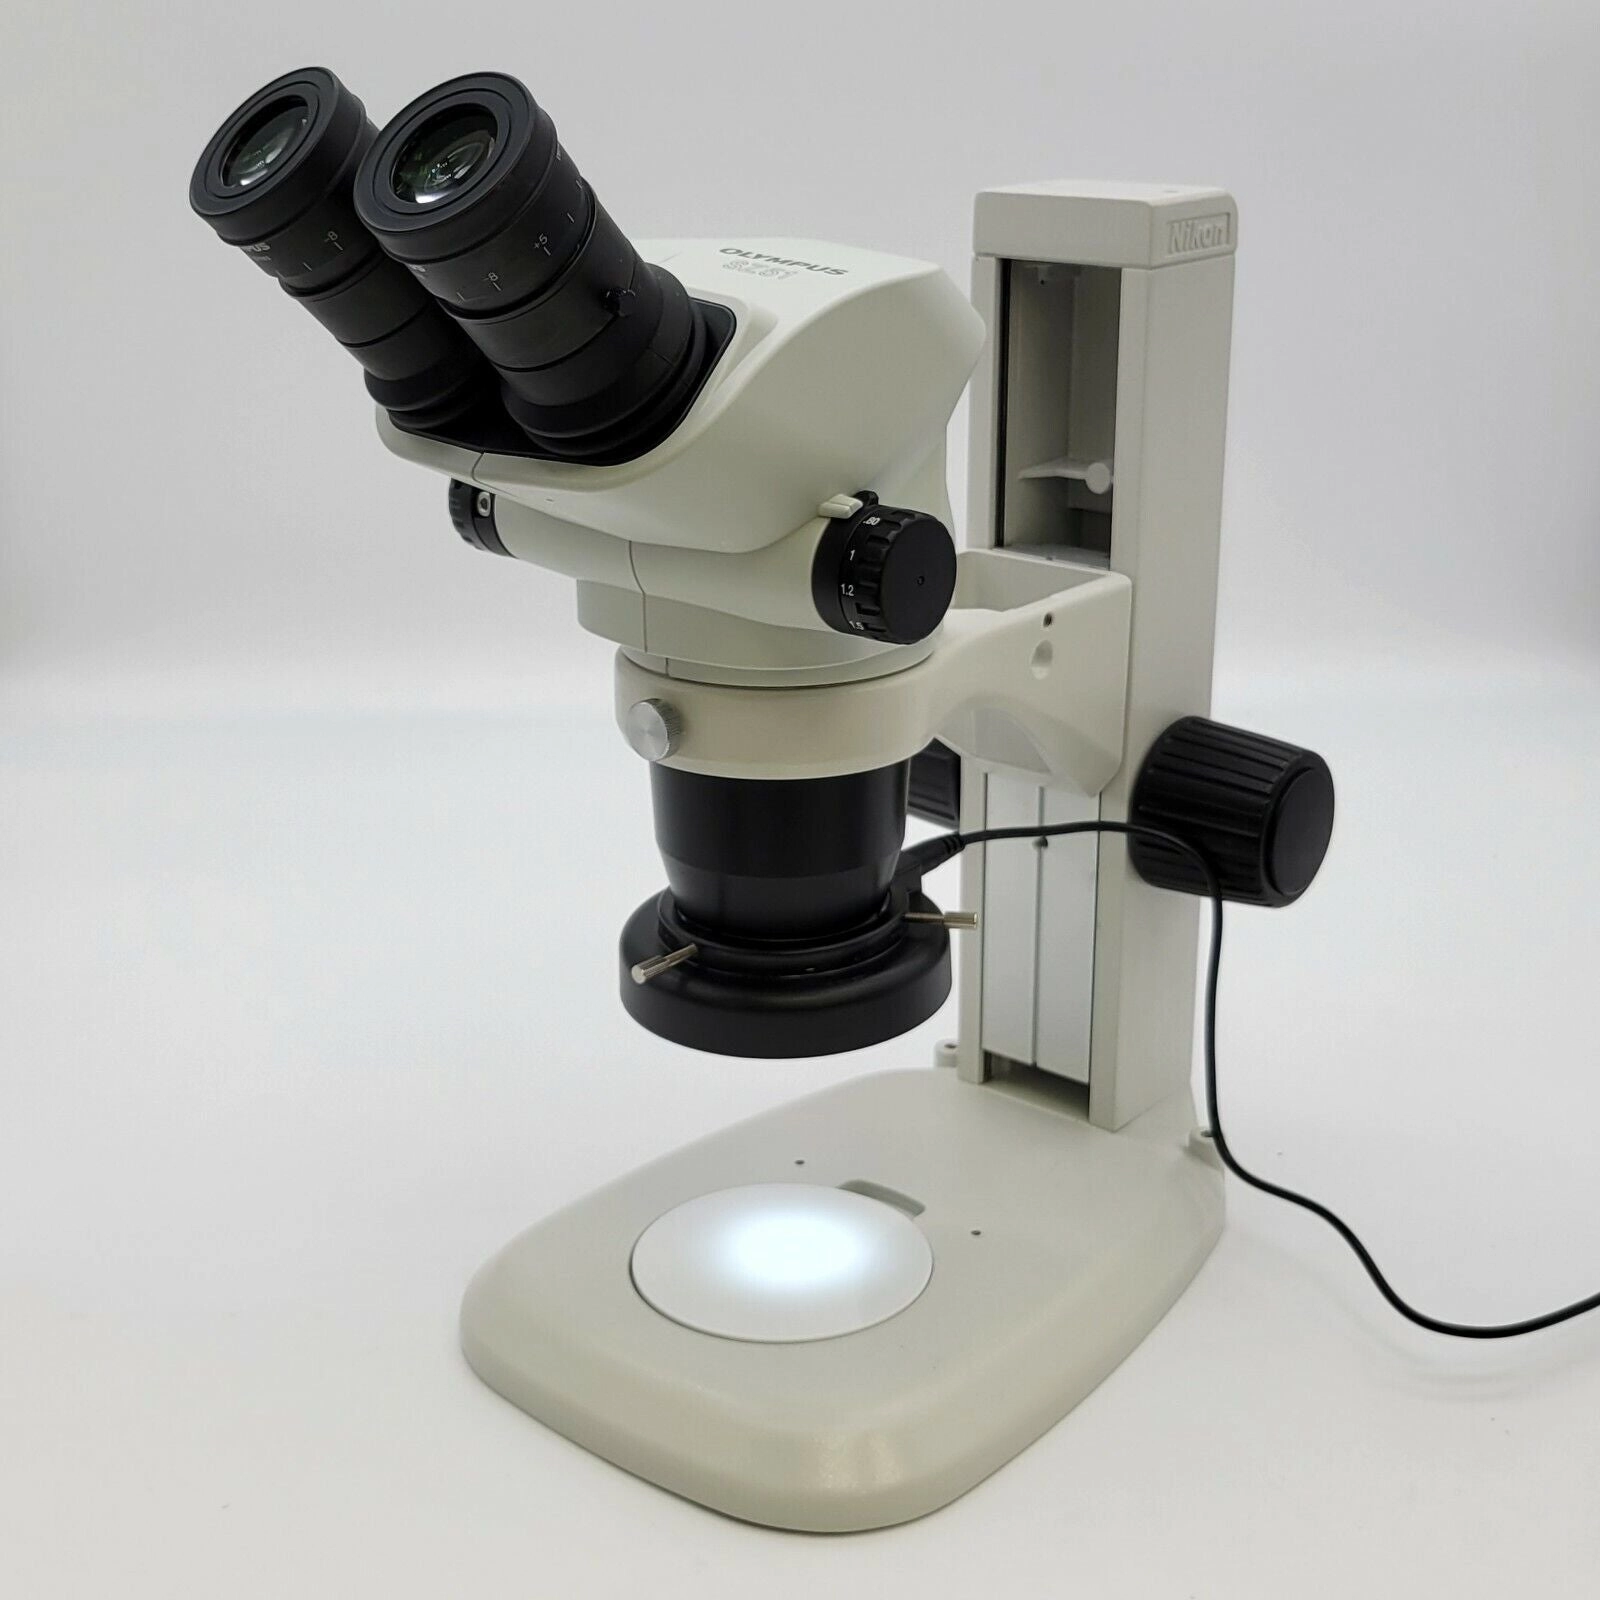 Olympus Stereo Microscope SZ51 with Stand and LED Ring Light